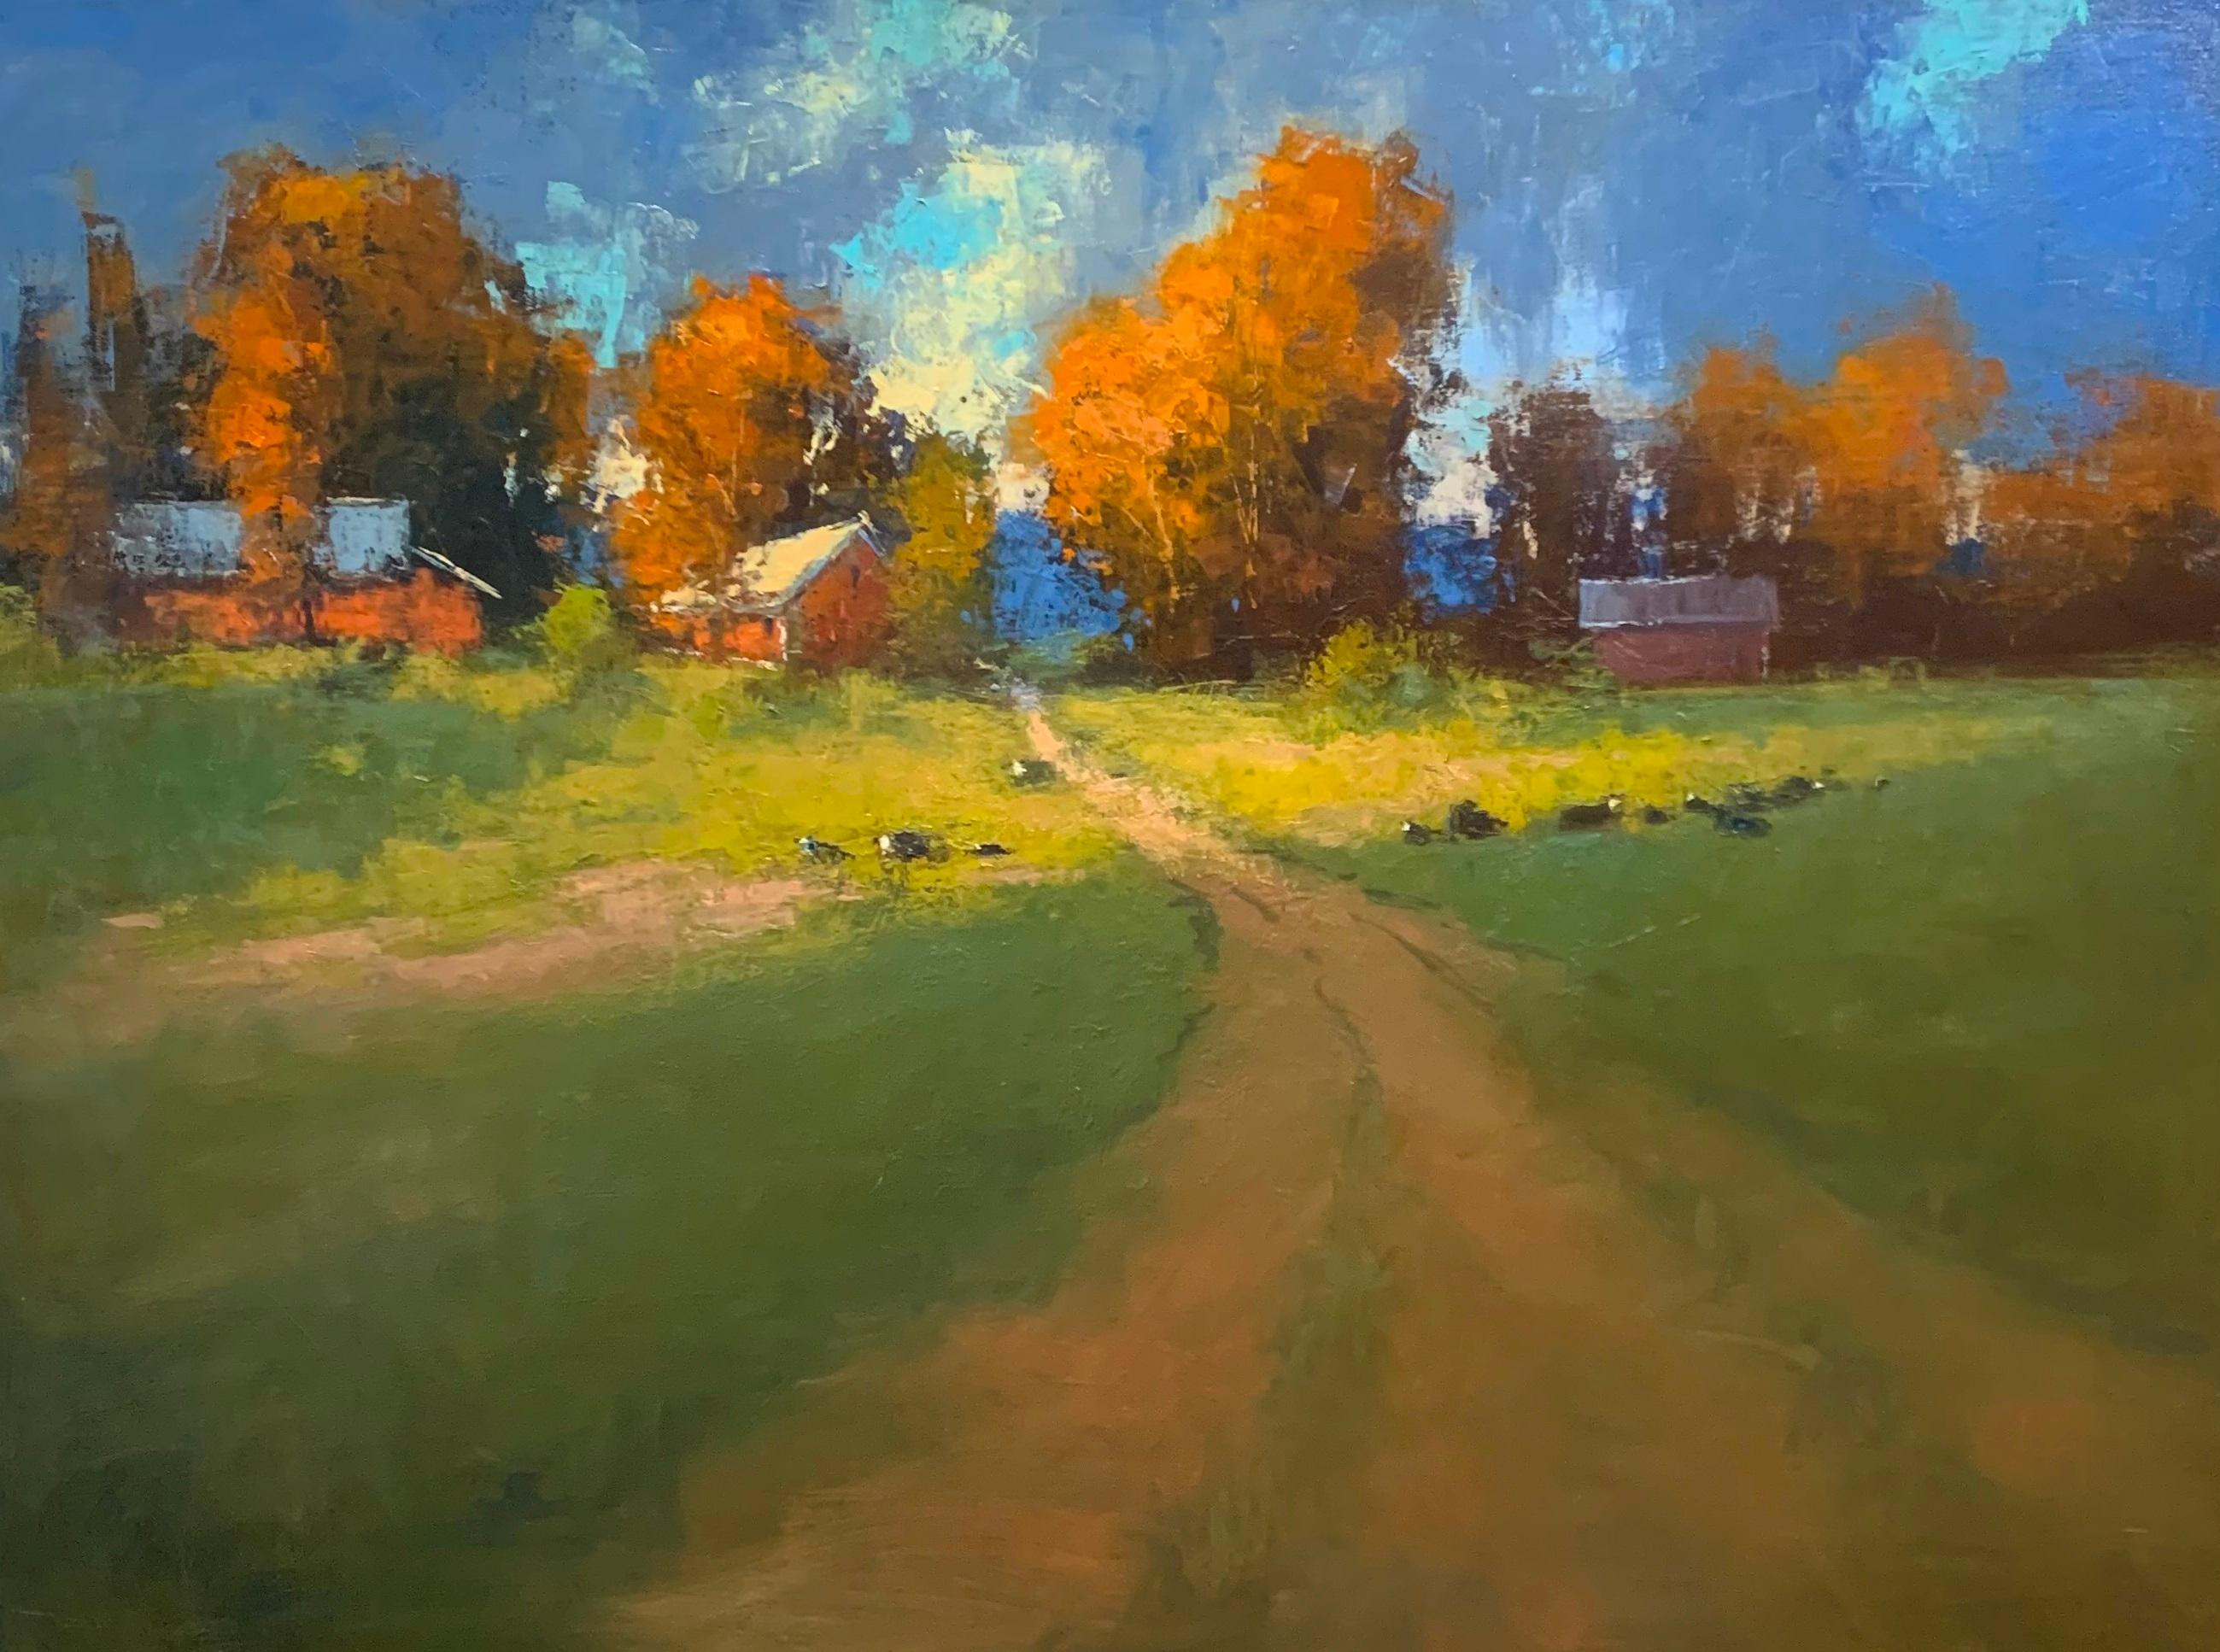 Romona Youngquist, Landscape Painting - "September Pasture"